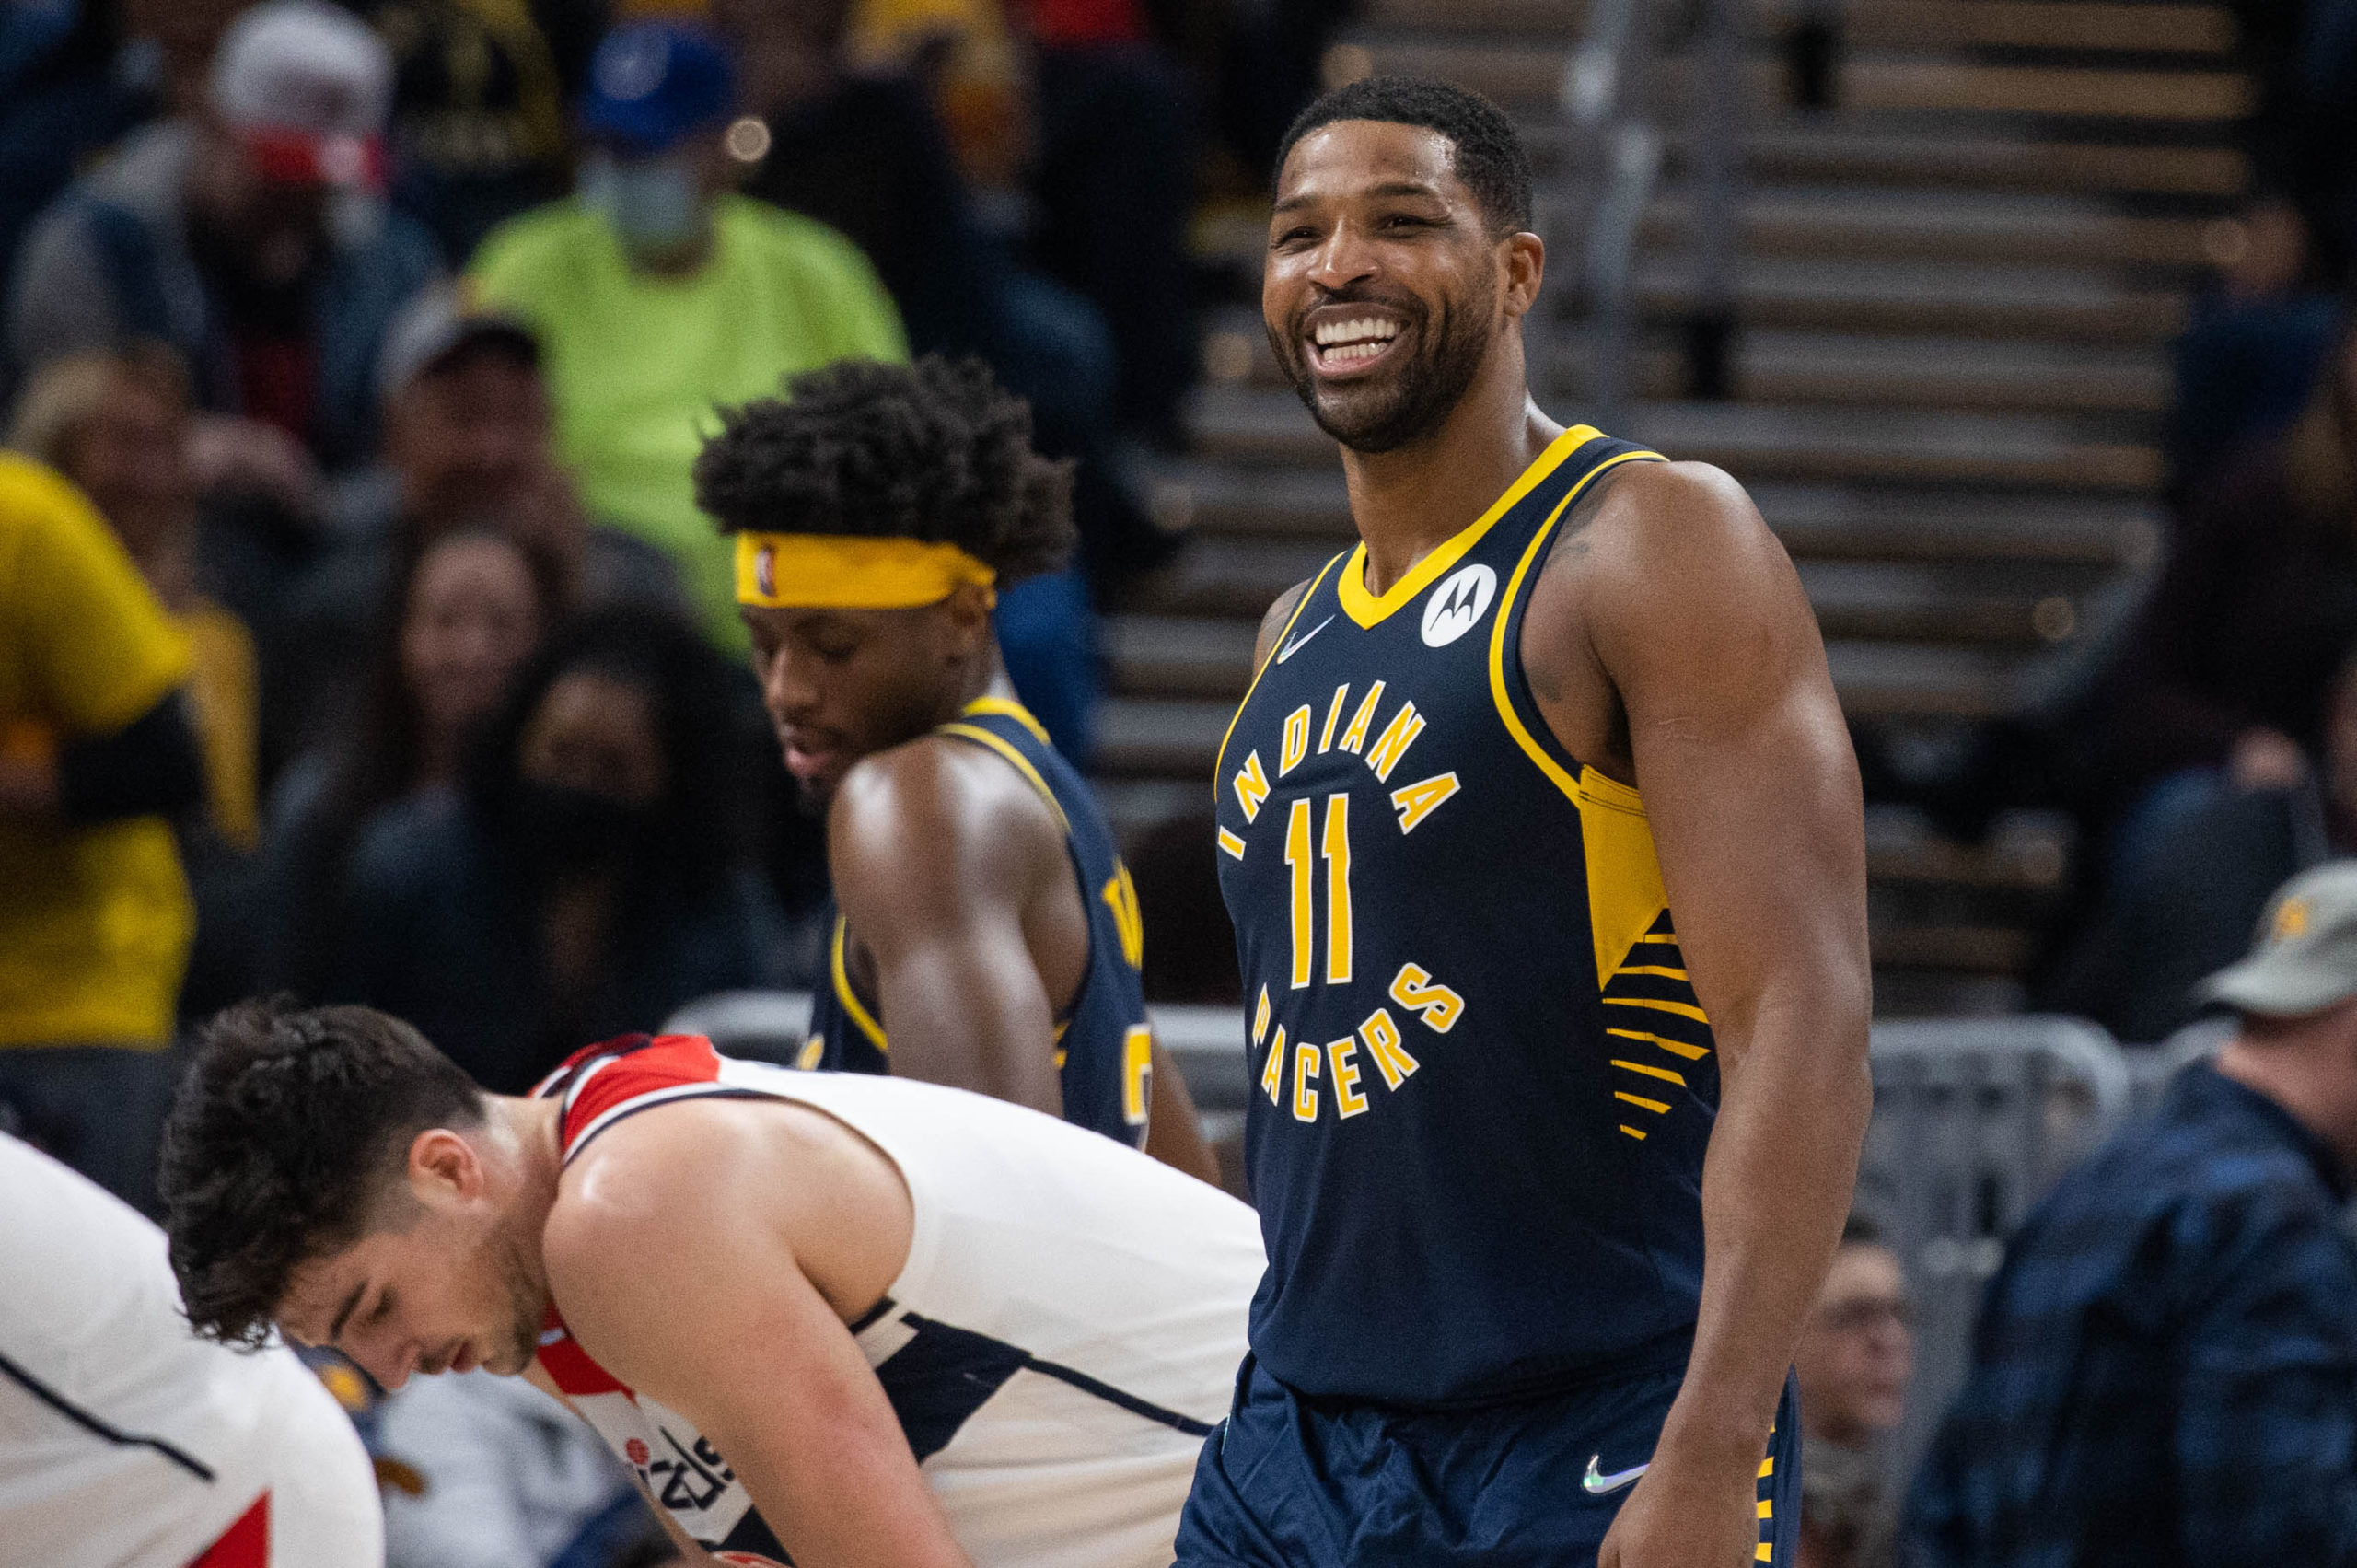 Feb 16, 2022; Indianapolis, Indiana, USA; Indiana Pacers center Tristan Thompson (11) celebrates a made basket in the first half against the Washington Wizards at Gainbridge Fieldhouse. 